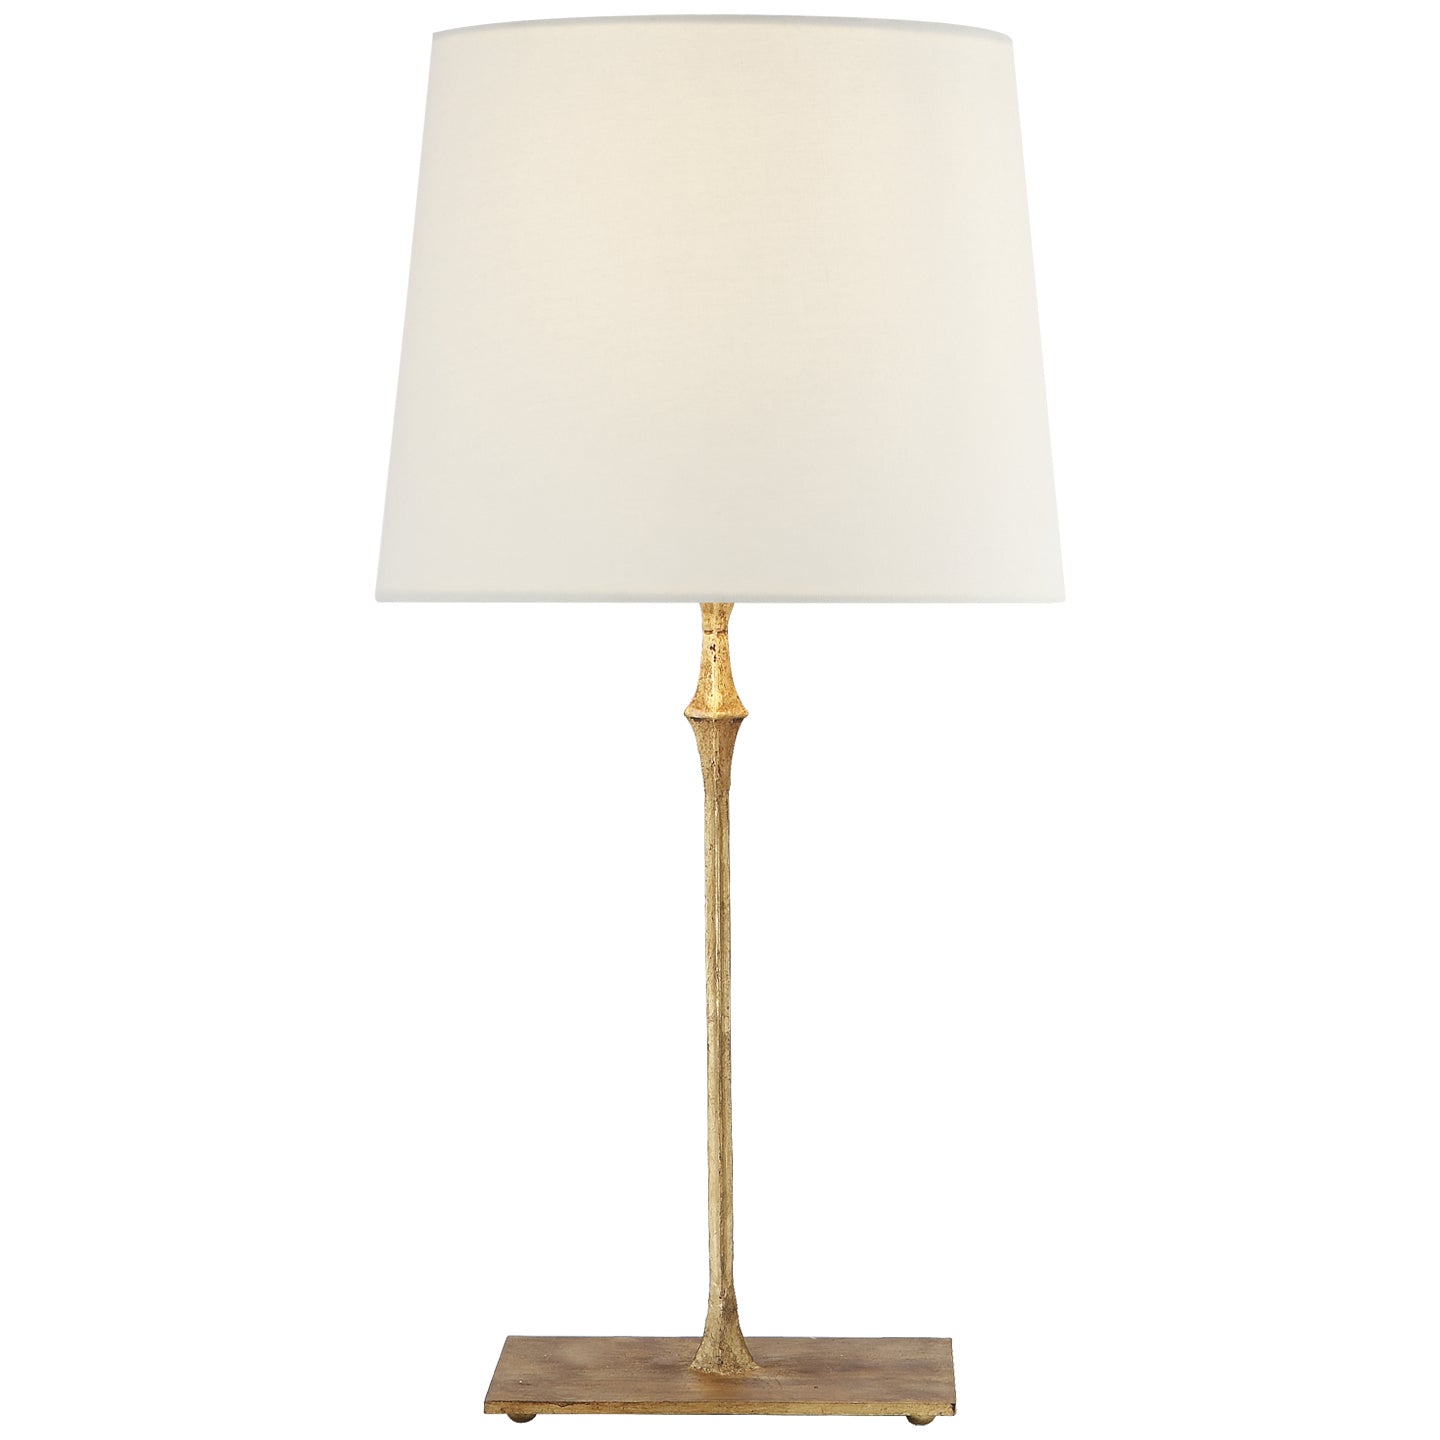 Load image into Gallery viewer, Visual Comfort Signature - S 3400GI-L - One Light Bedside Lamp - dauphine - Gilded Iron
